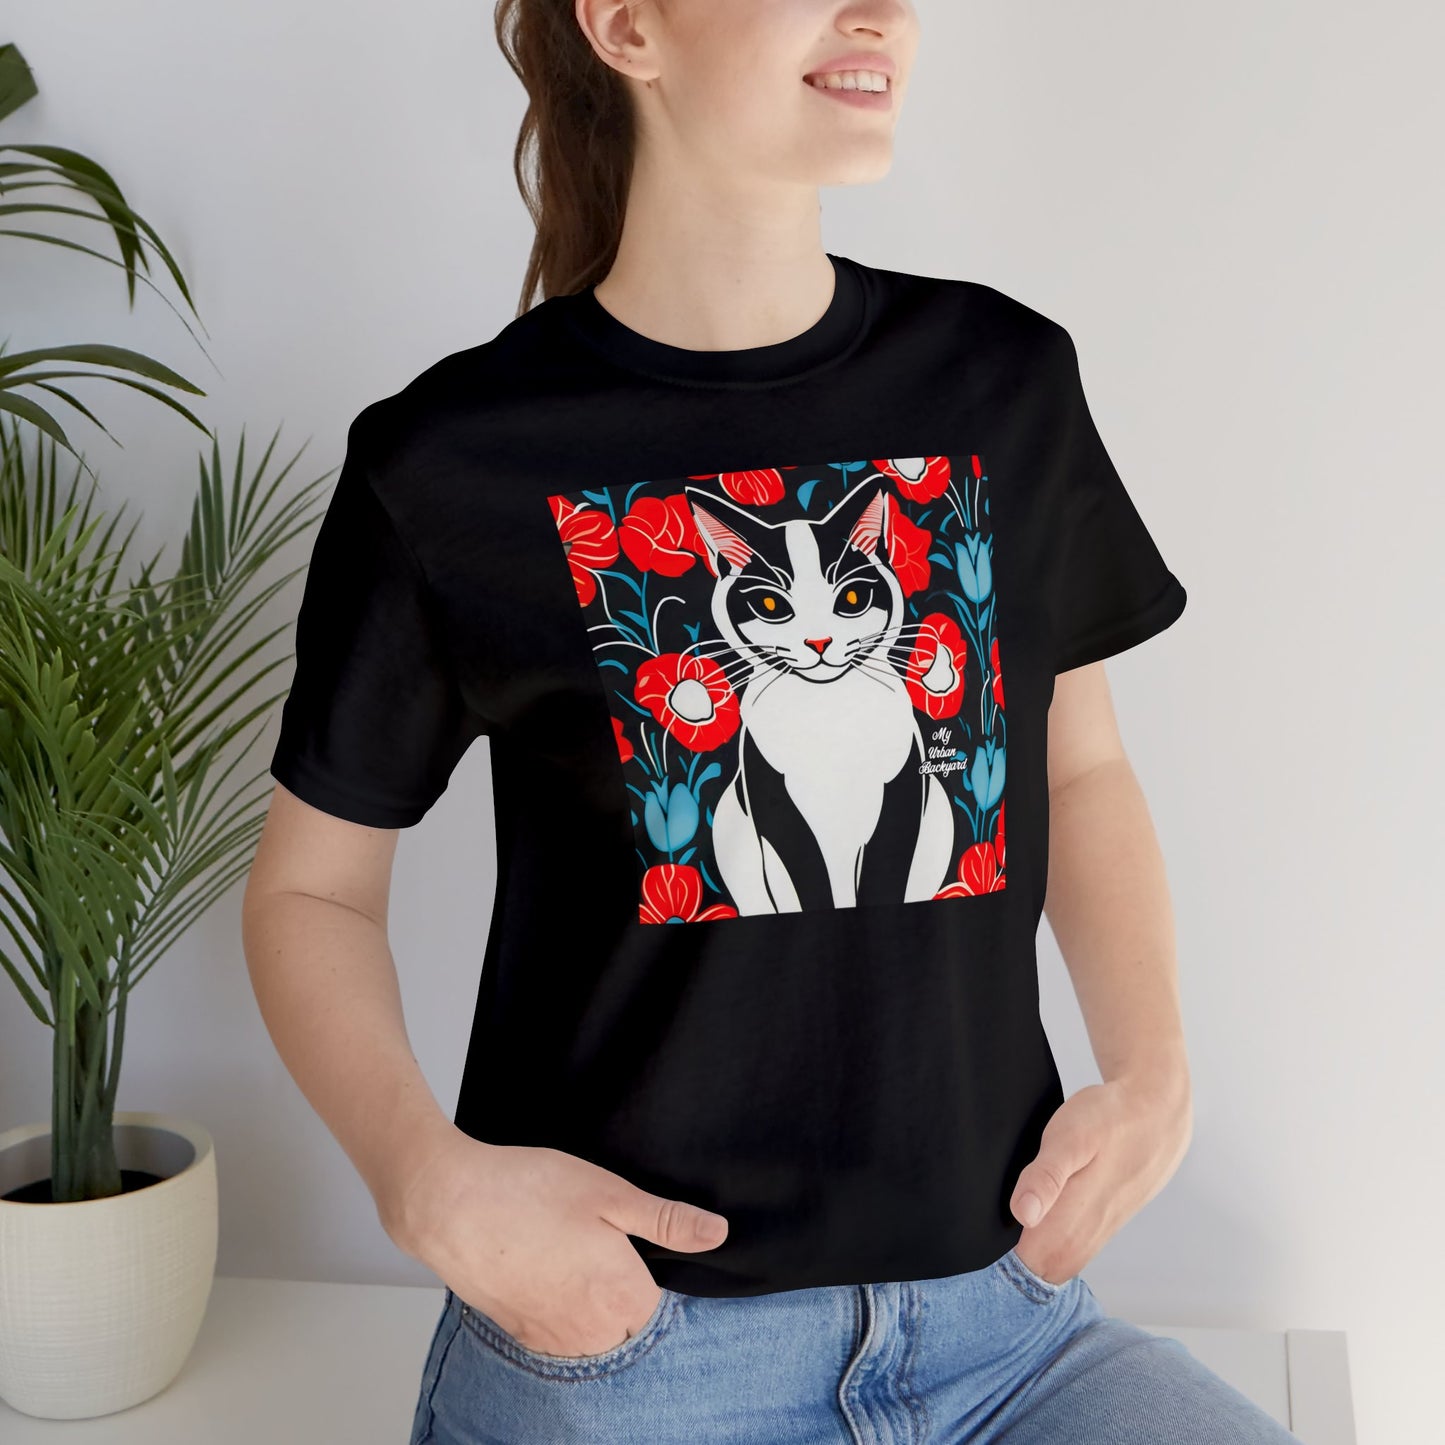 Cat with Red Flowers, Soft 100% Jersey Cotton T-Shirt, Unisex, Short Sleeve, Retail Fit